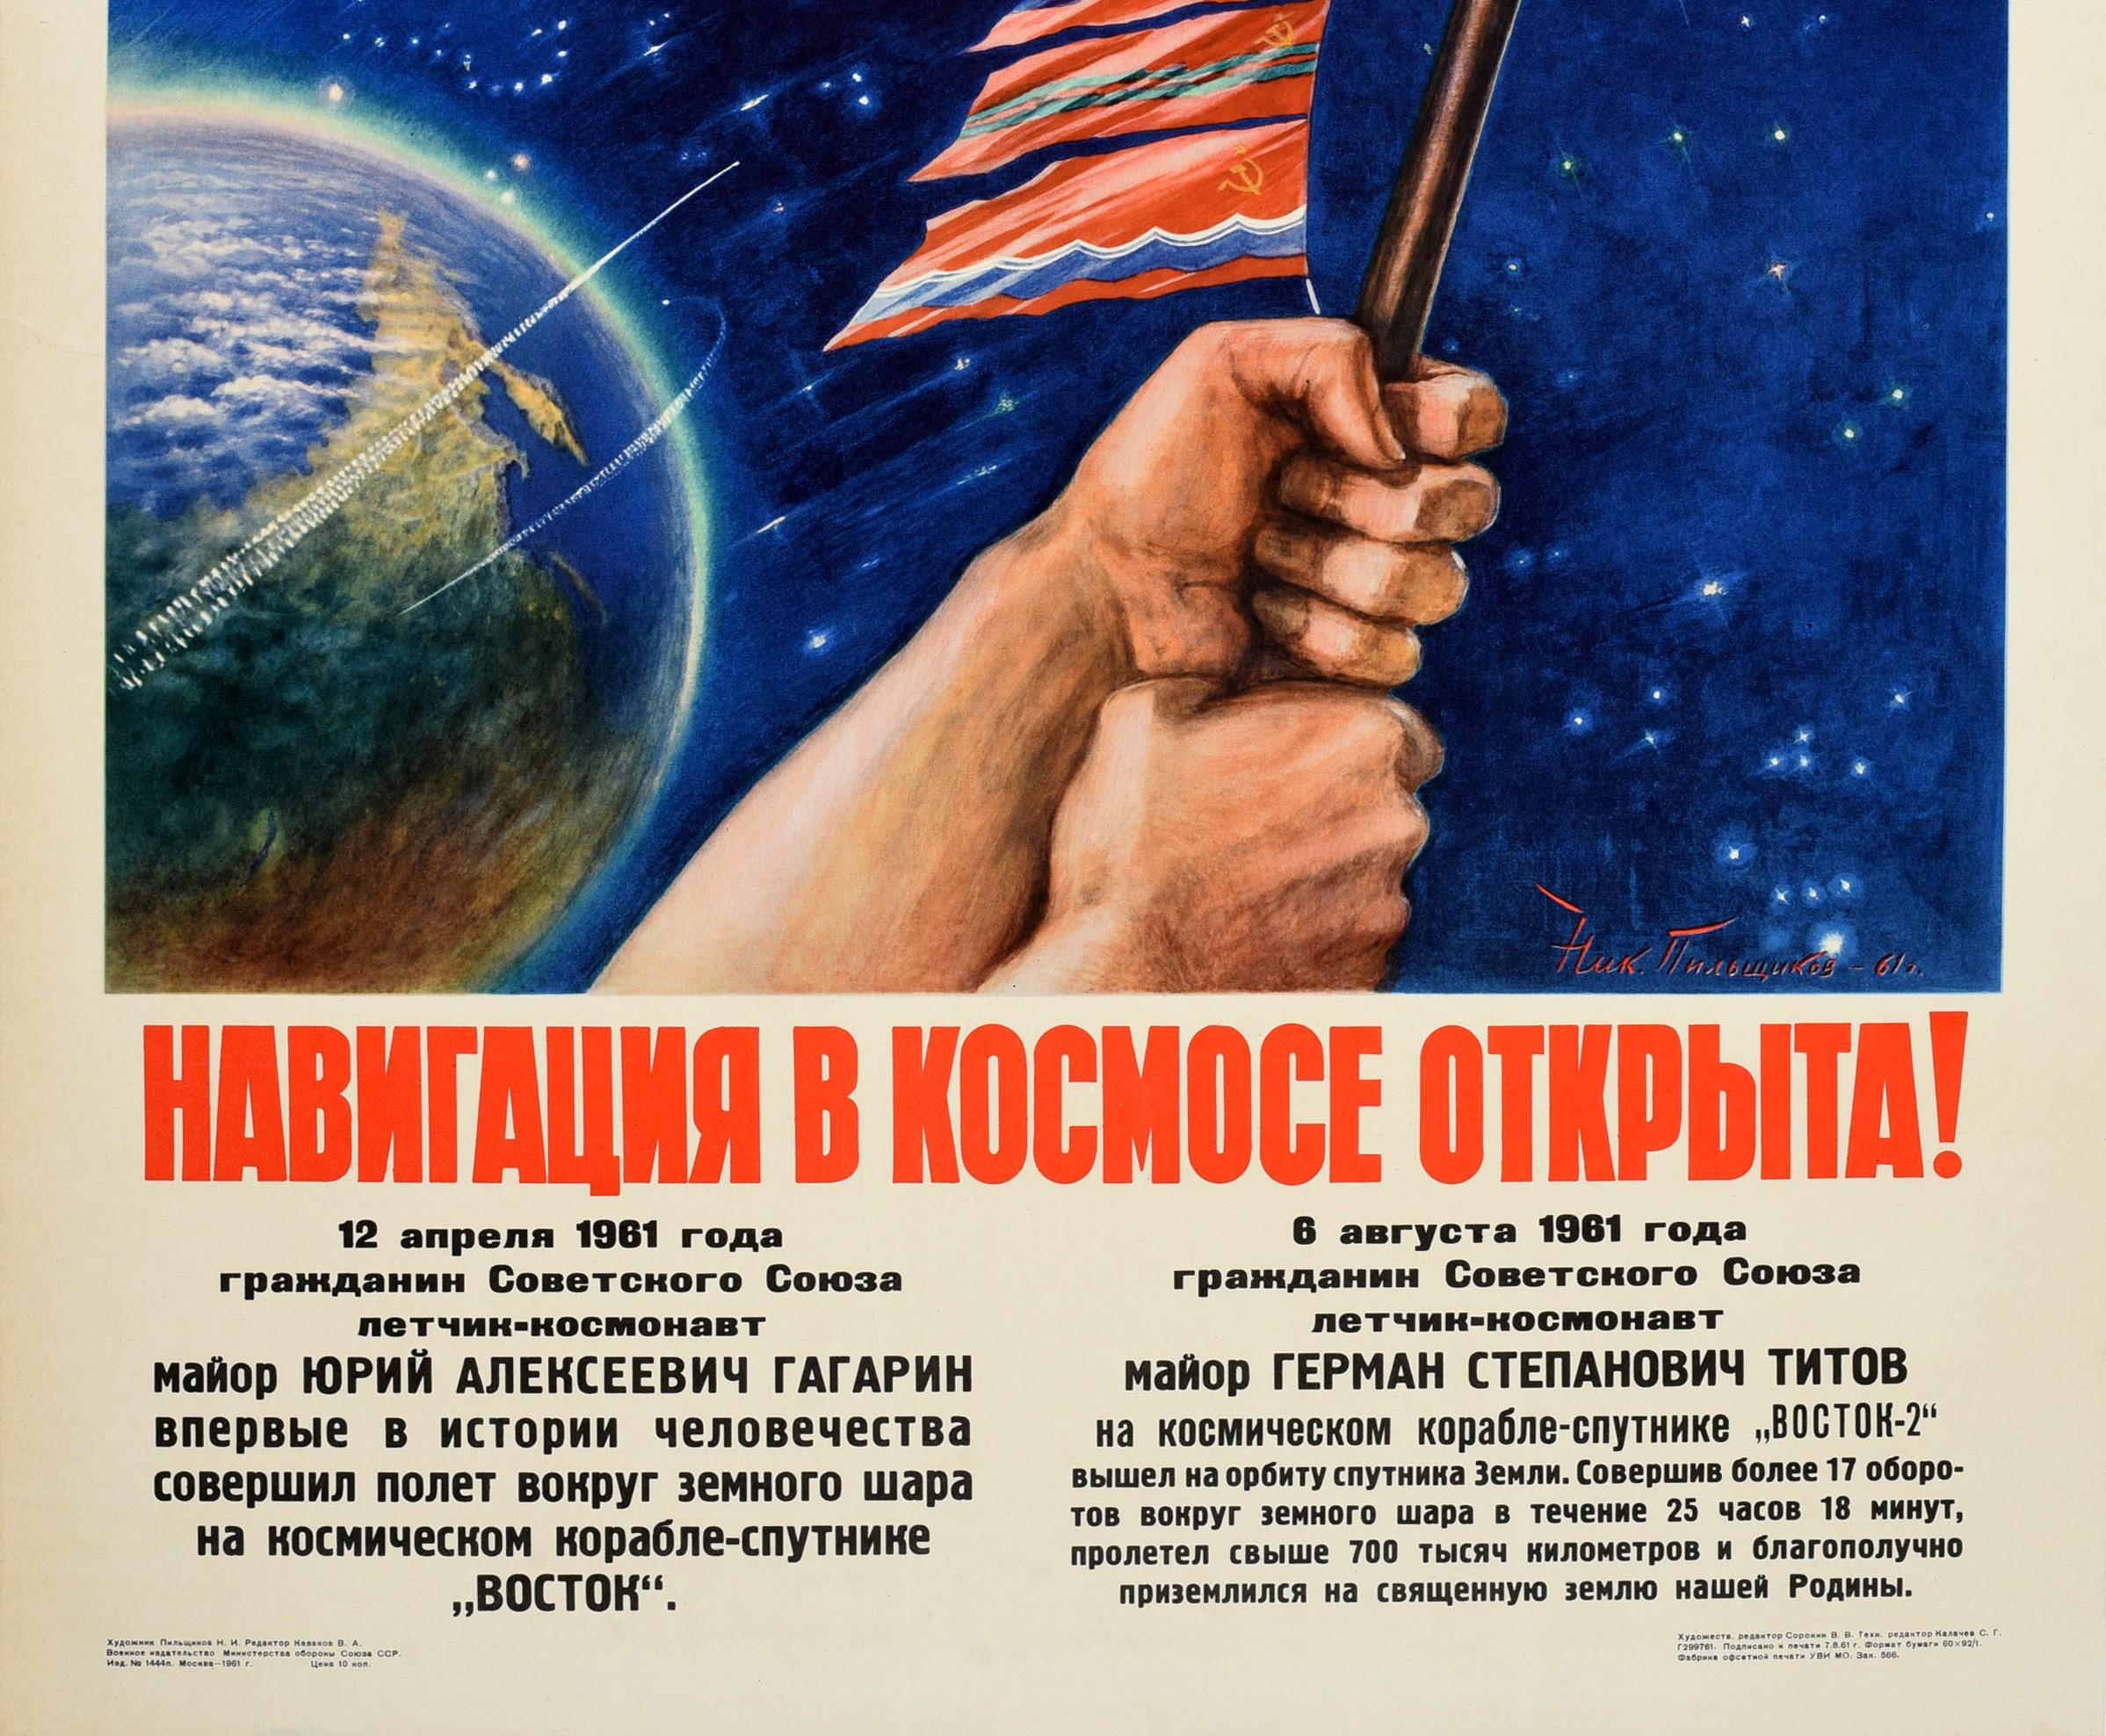 american space race posters